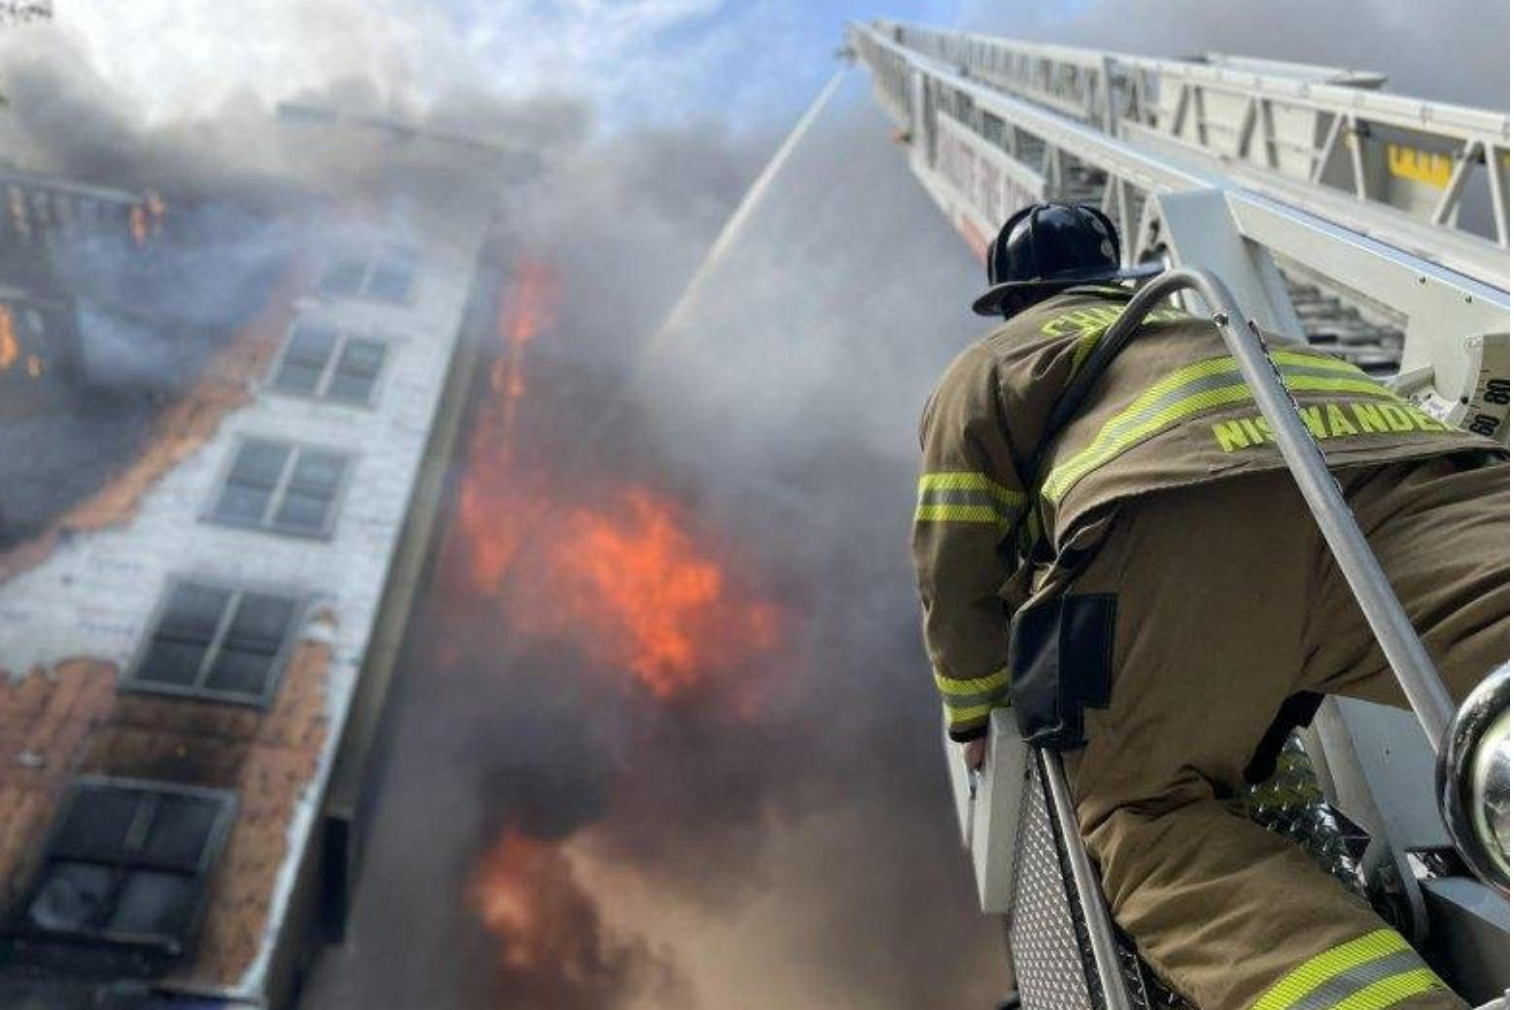 2 bodies found at site of 5-alarm fire in Charlotte, N.C.